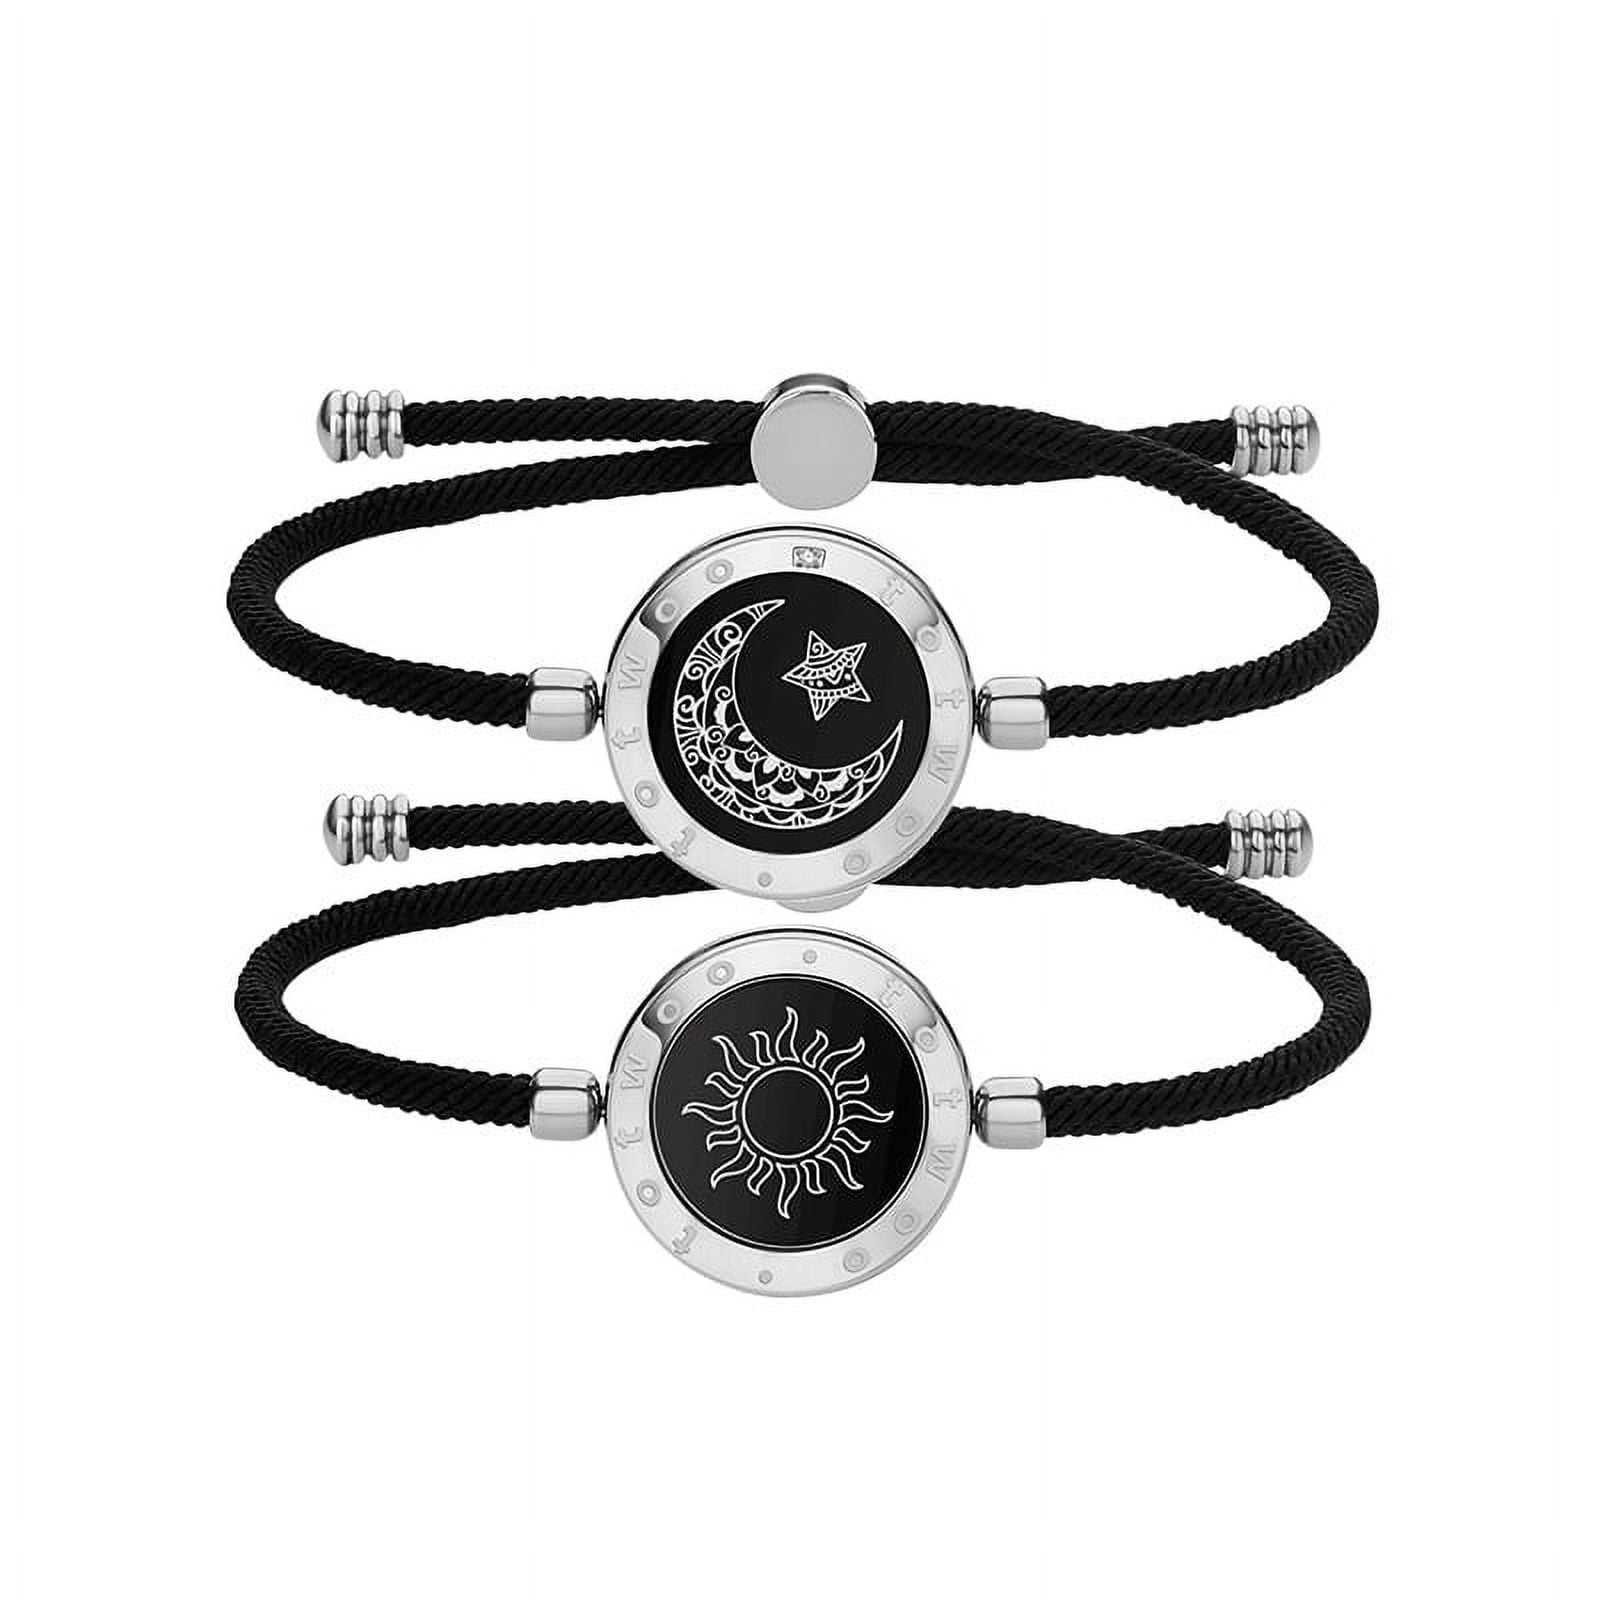 Totwoo Sun and Moon Long Distance Touch Bracelets for Couples